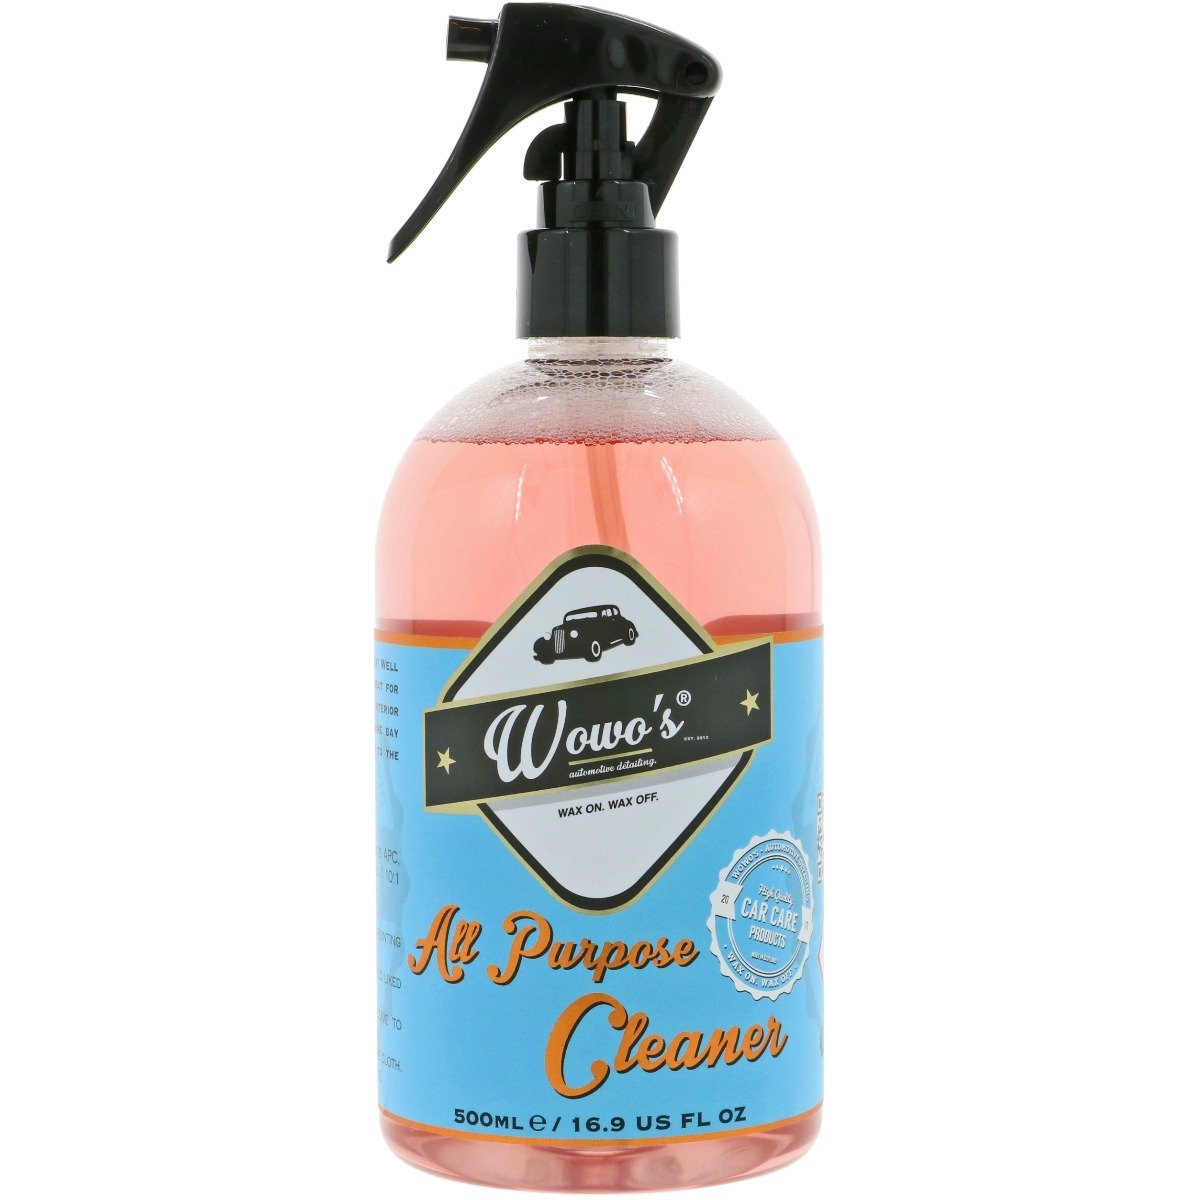 All Purpose Cleaner - 500ml